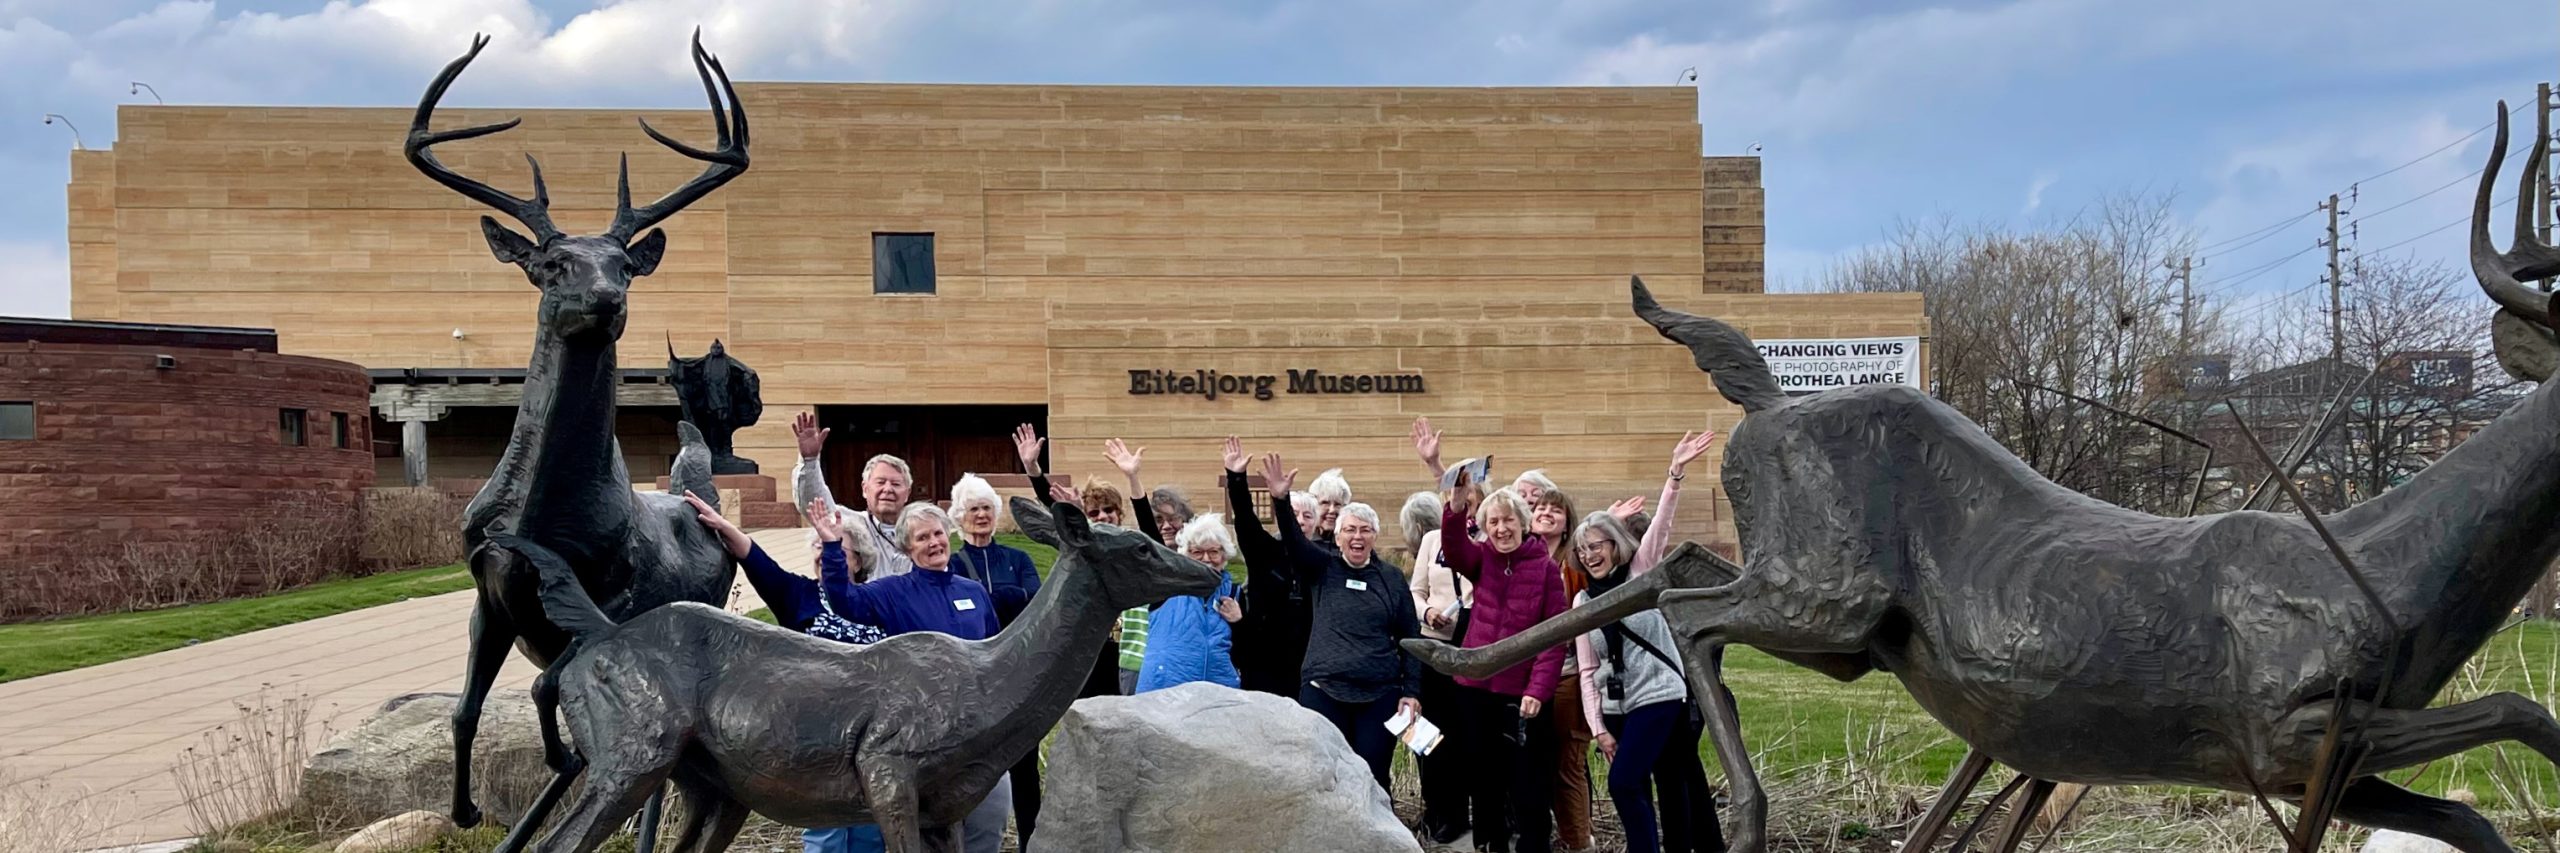 Travelers stand in front of the Eitaljorg Museum waving at the camera